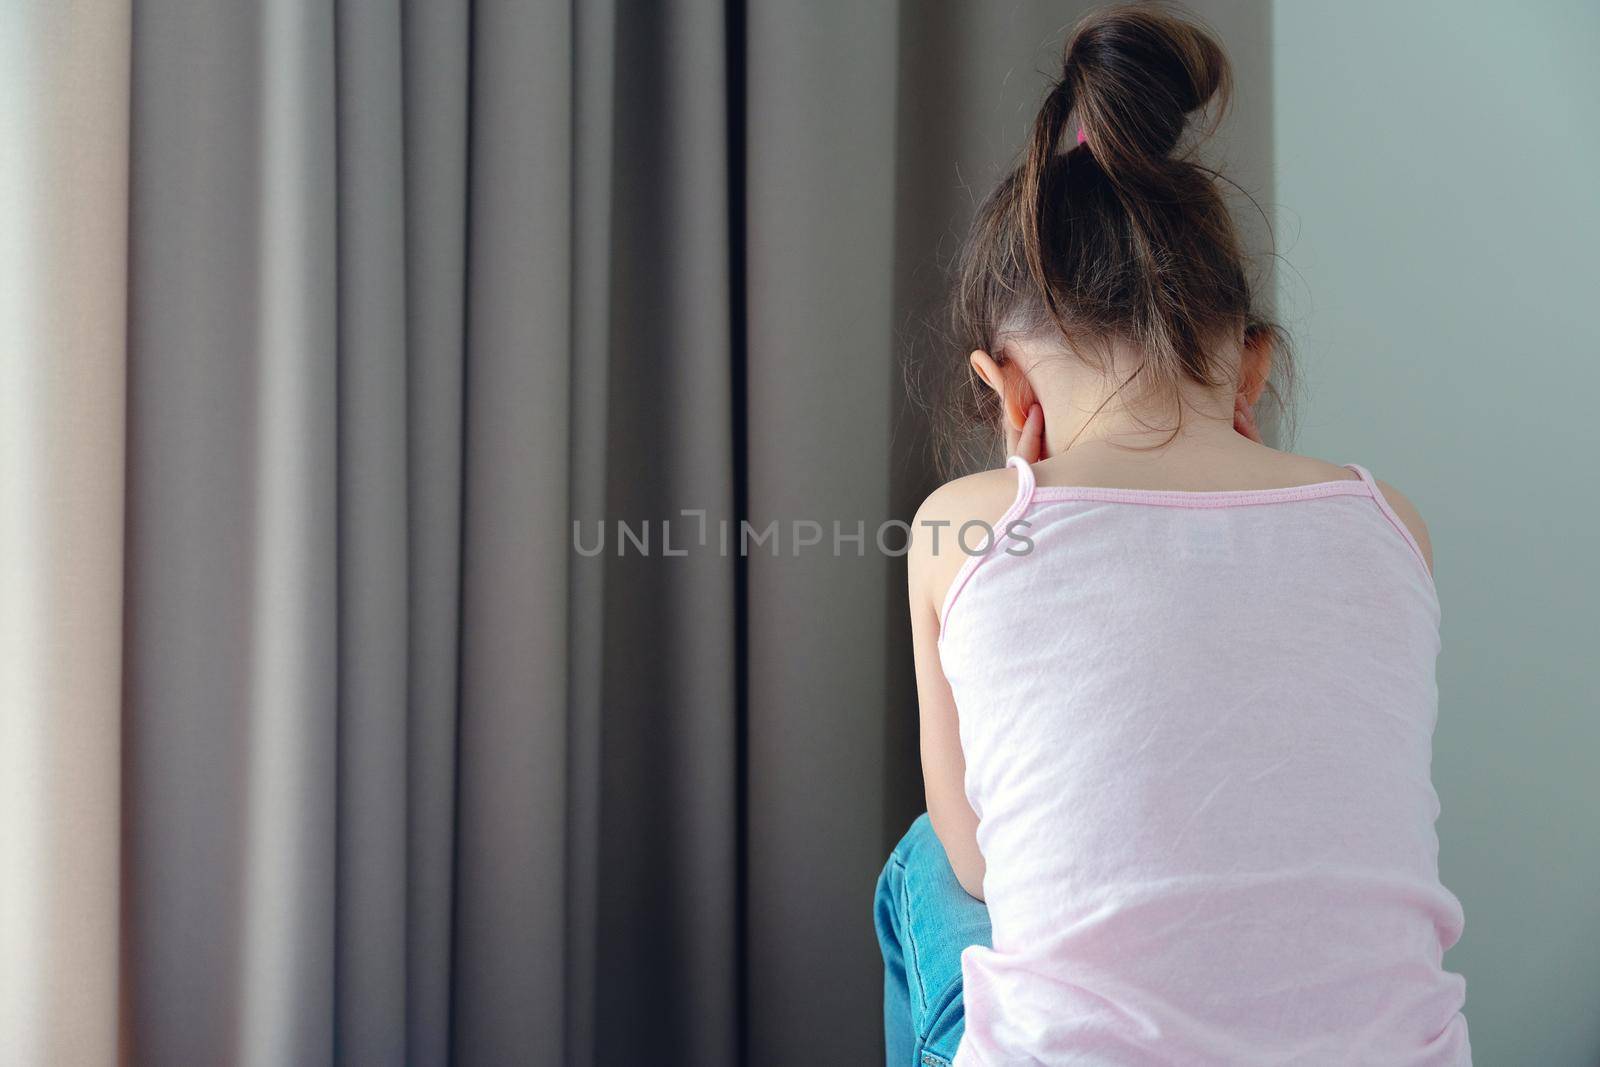 A little sad girl sitting on a bed, back view by Mariakray